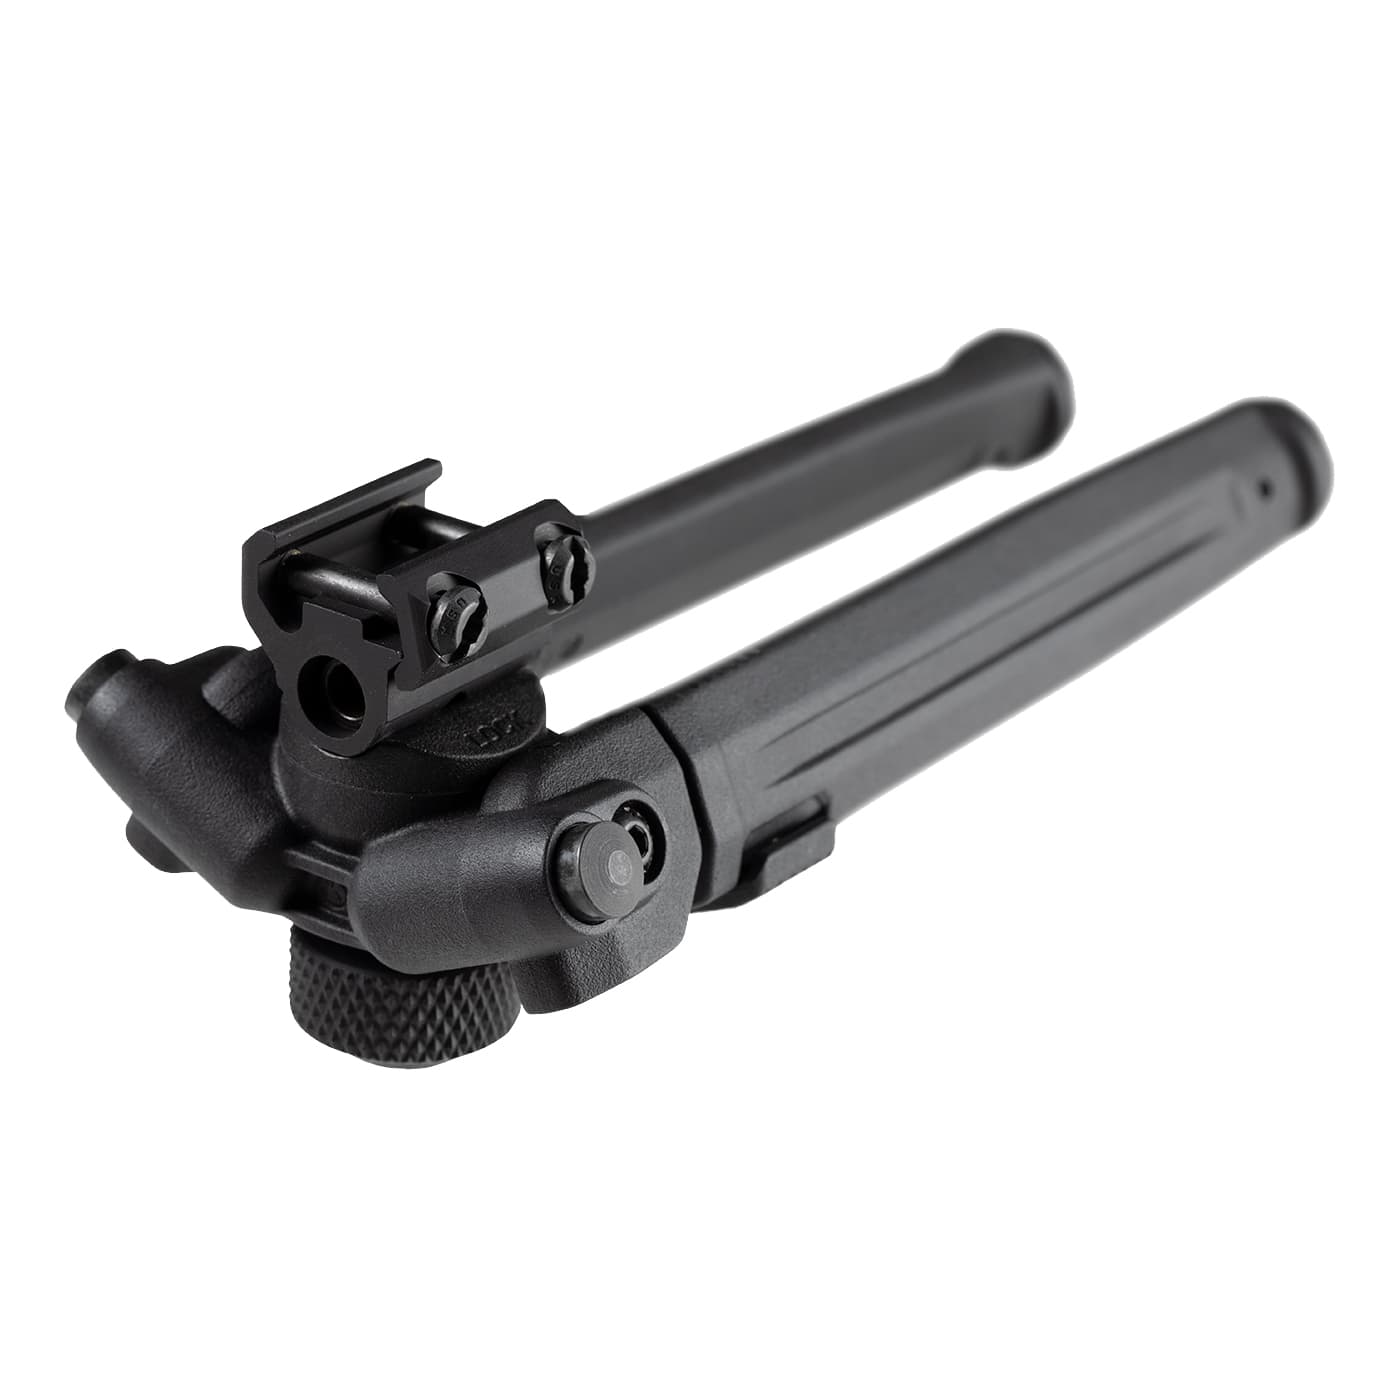 Magpul® Bipod for 1913 Picatinny Rail - Collapsed View